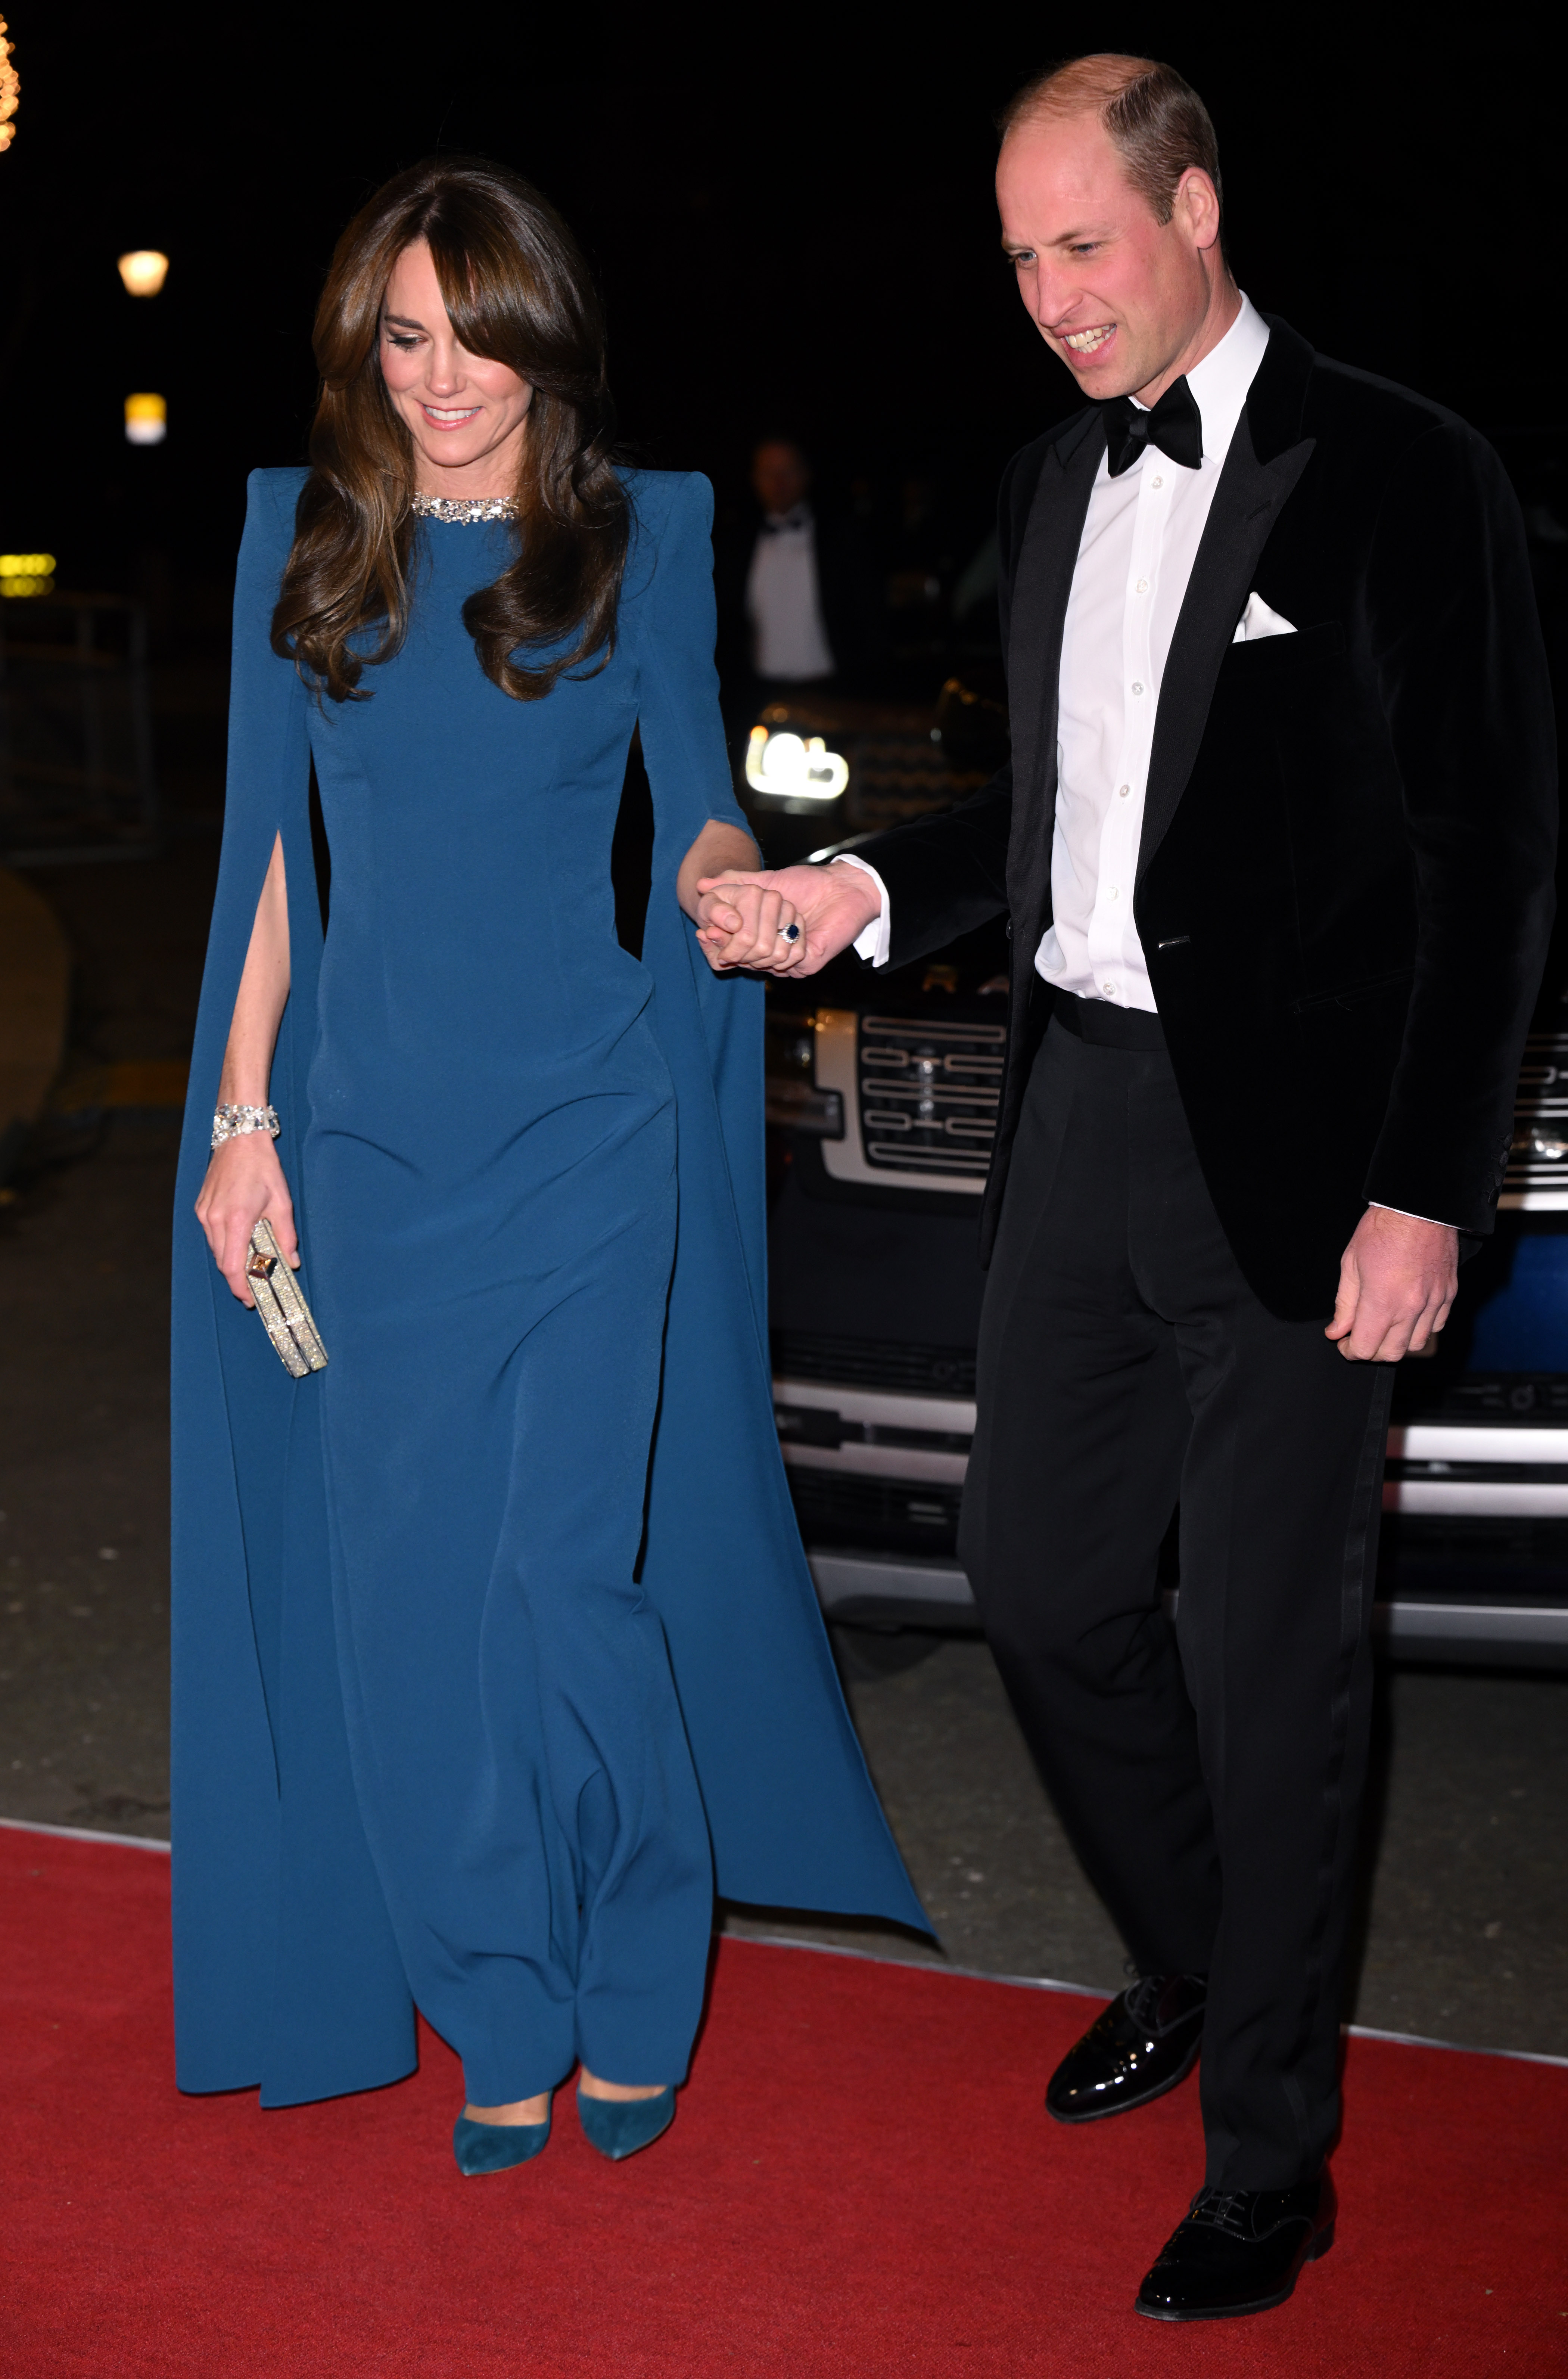 Princess Catherine and Prince William at The Royal Variety Performance event in London, England on November 30, 2023 | Source: Getty Images